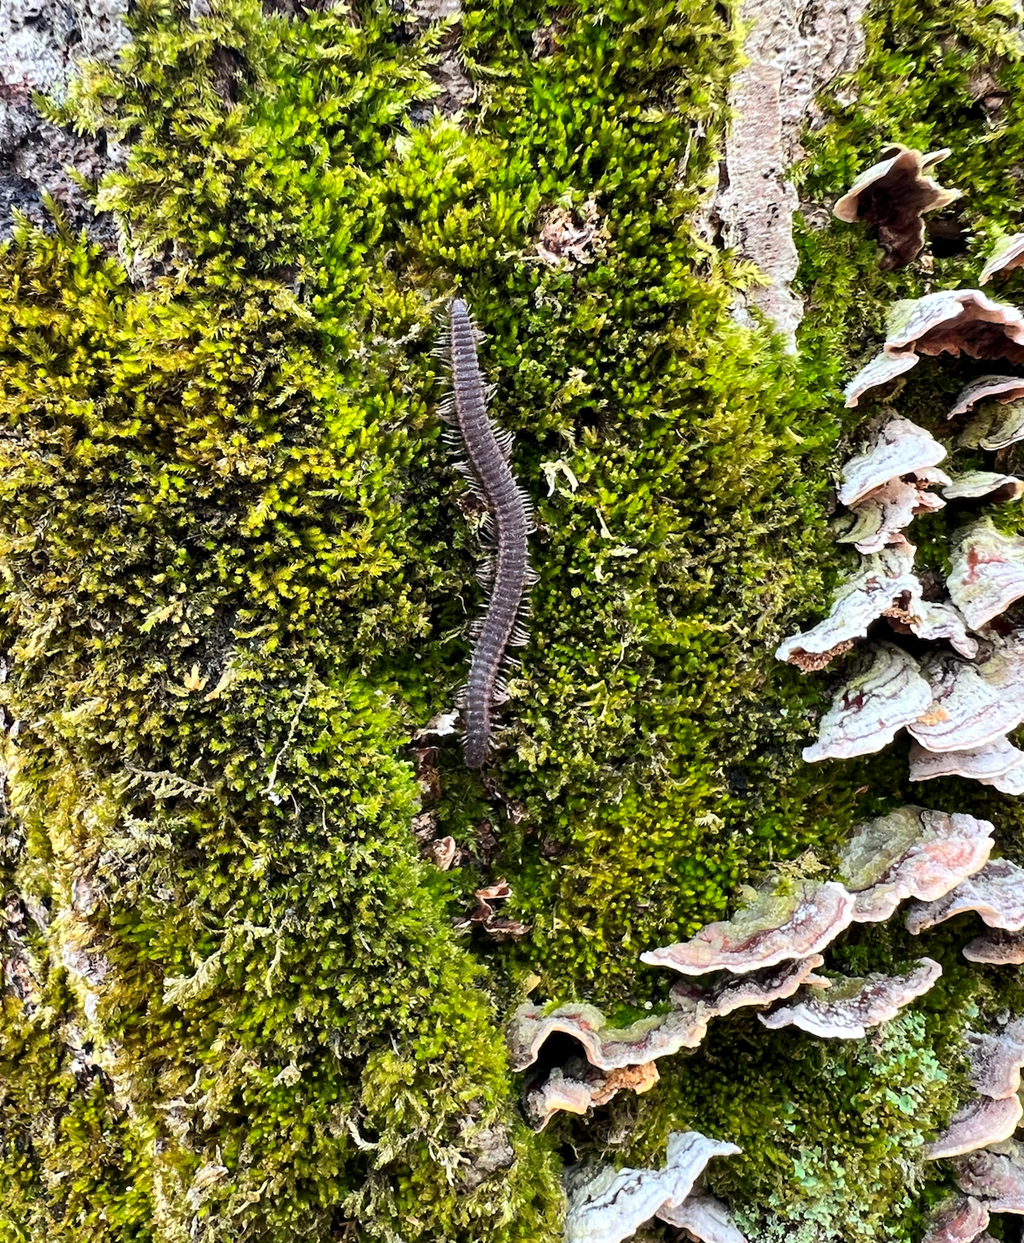 A Millipede Contrasted by Moss on a Tree Stump